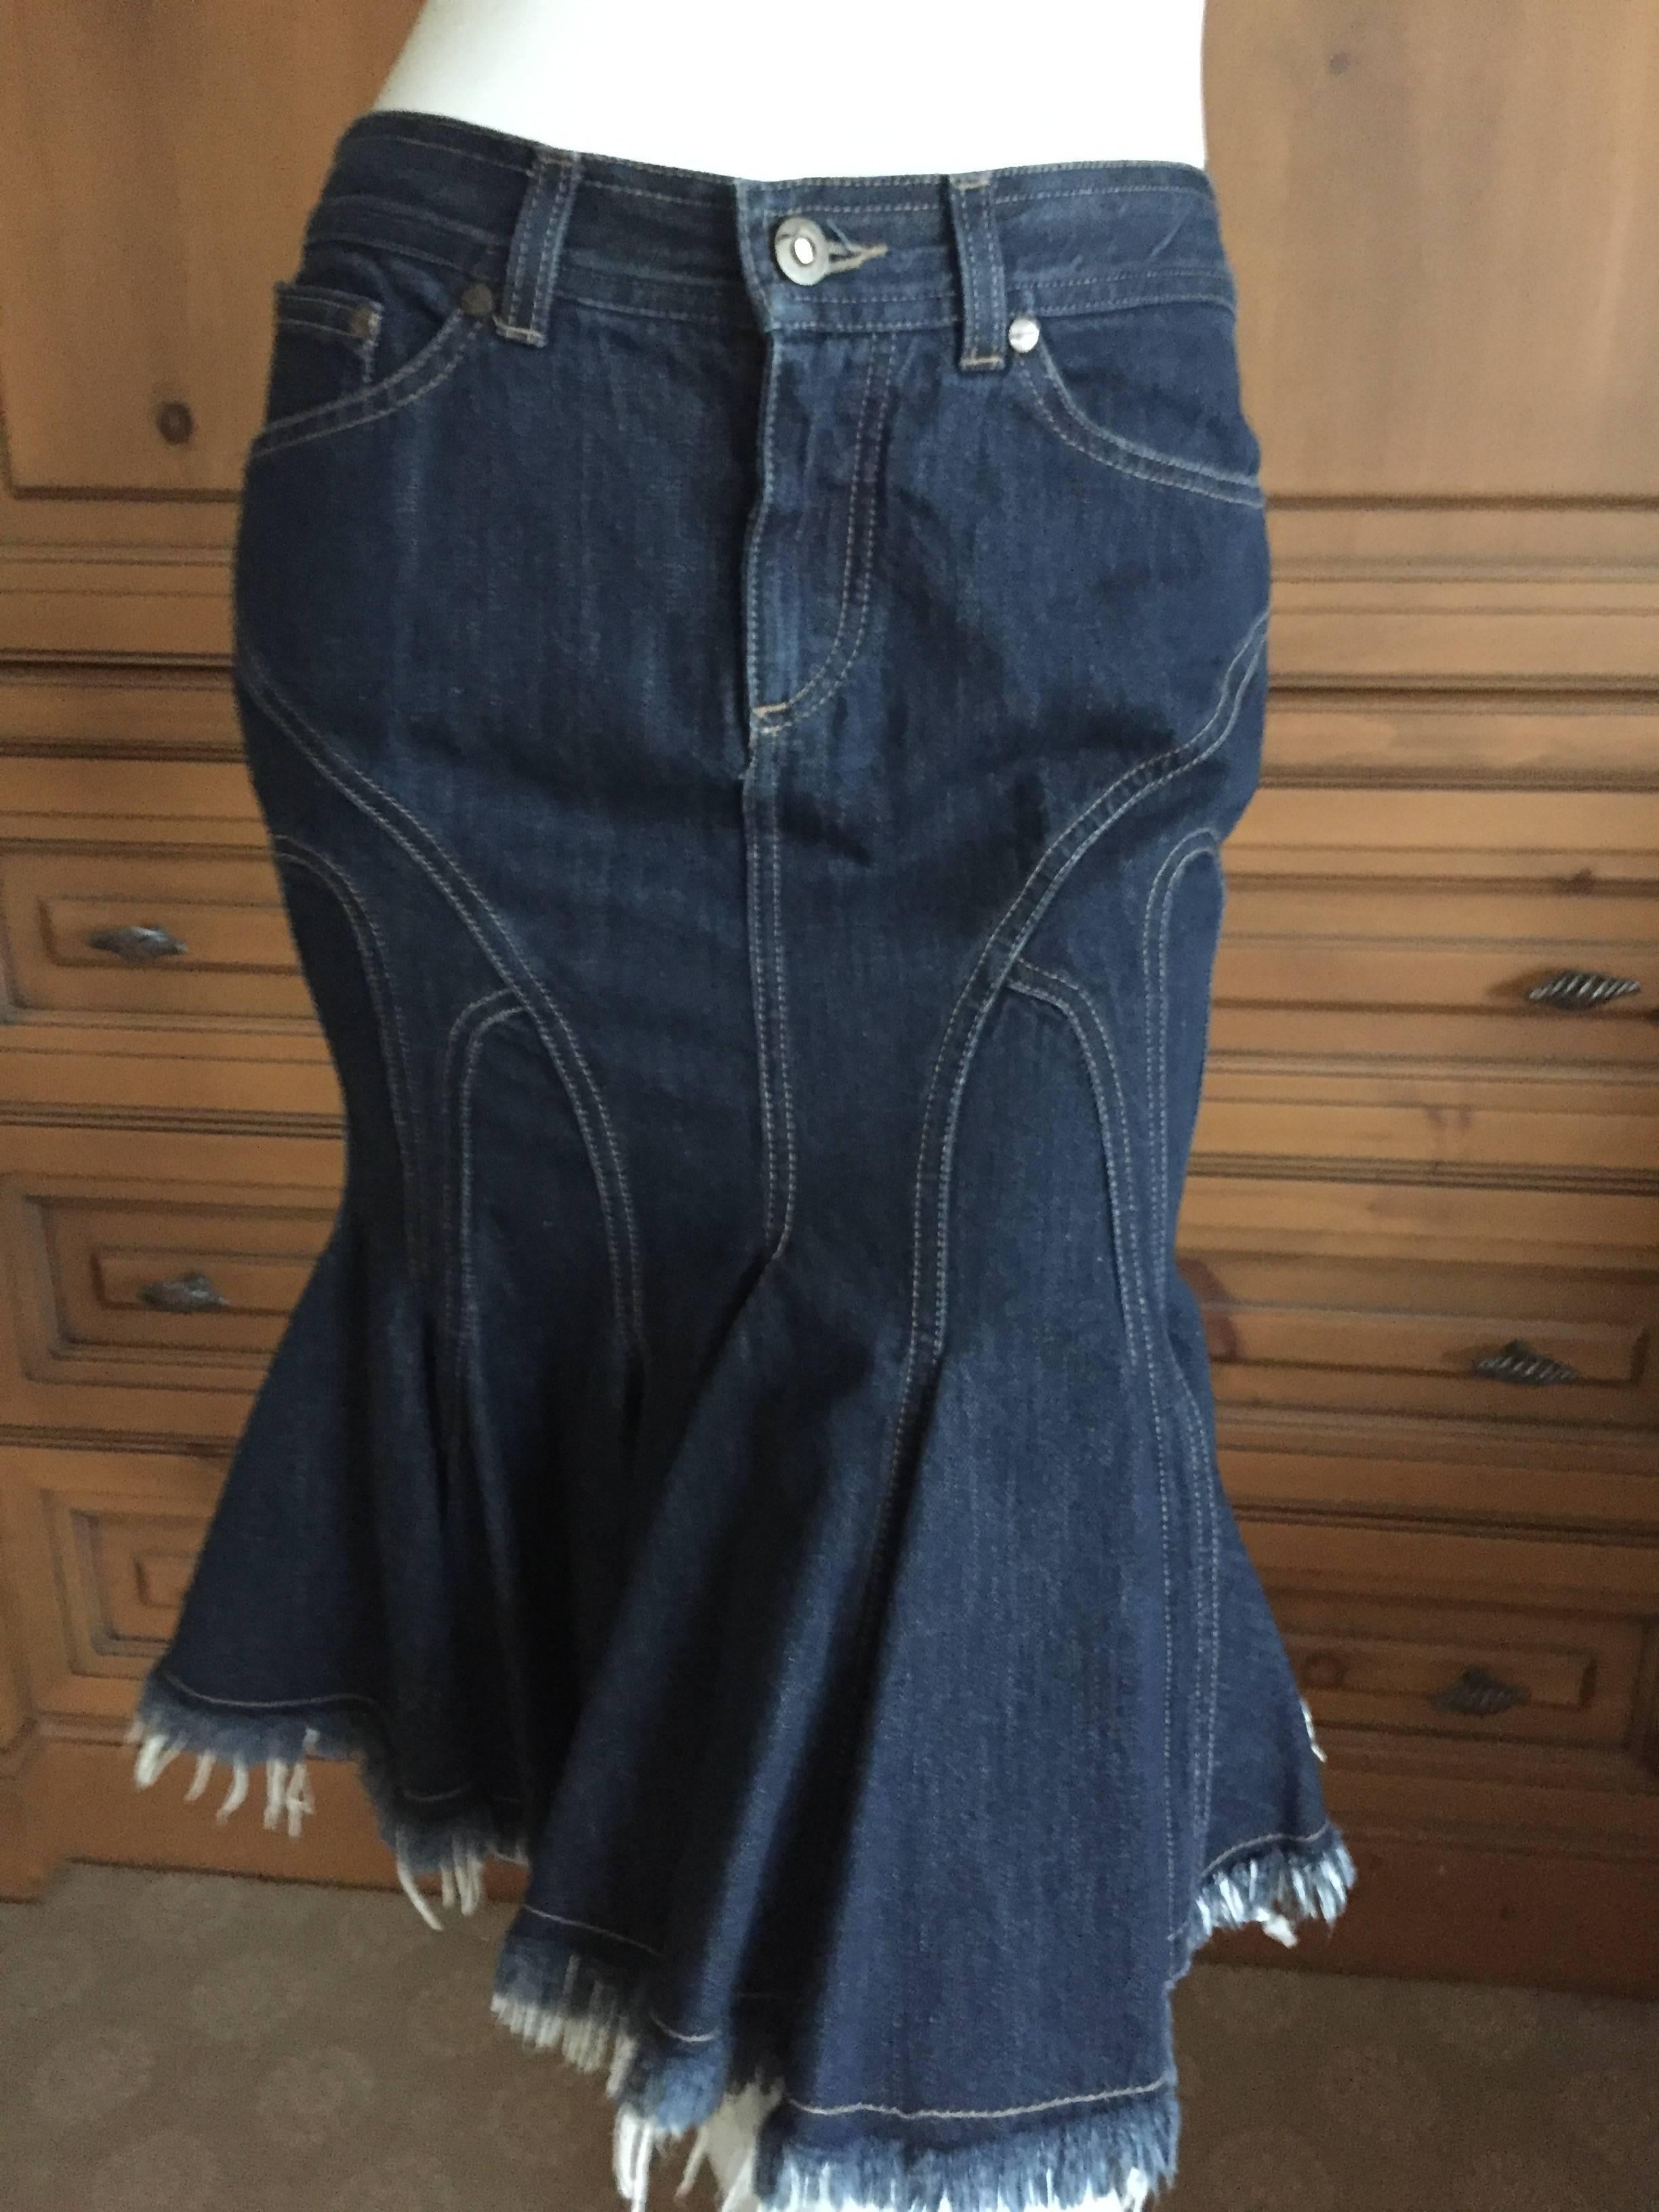 Brilliannt denim skirt from Alexander McQueen.
Only McQueen could sculpt curves in to a skirt like this. 
It is an early piece, early 90's.
Size 38
Waist 32